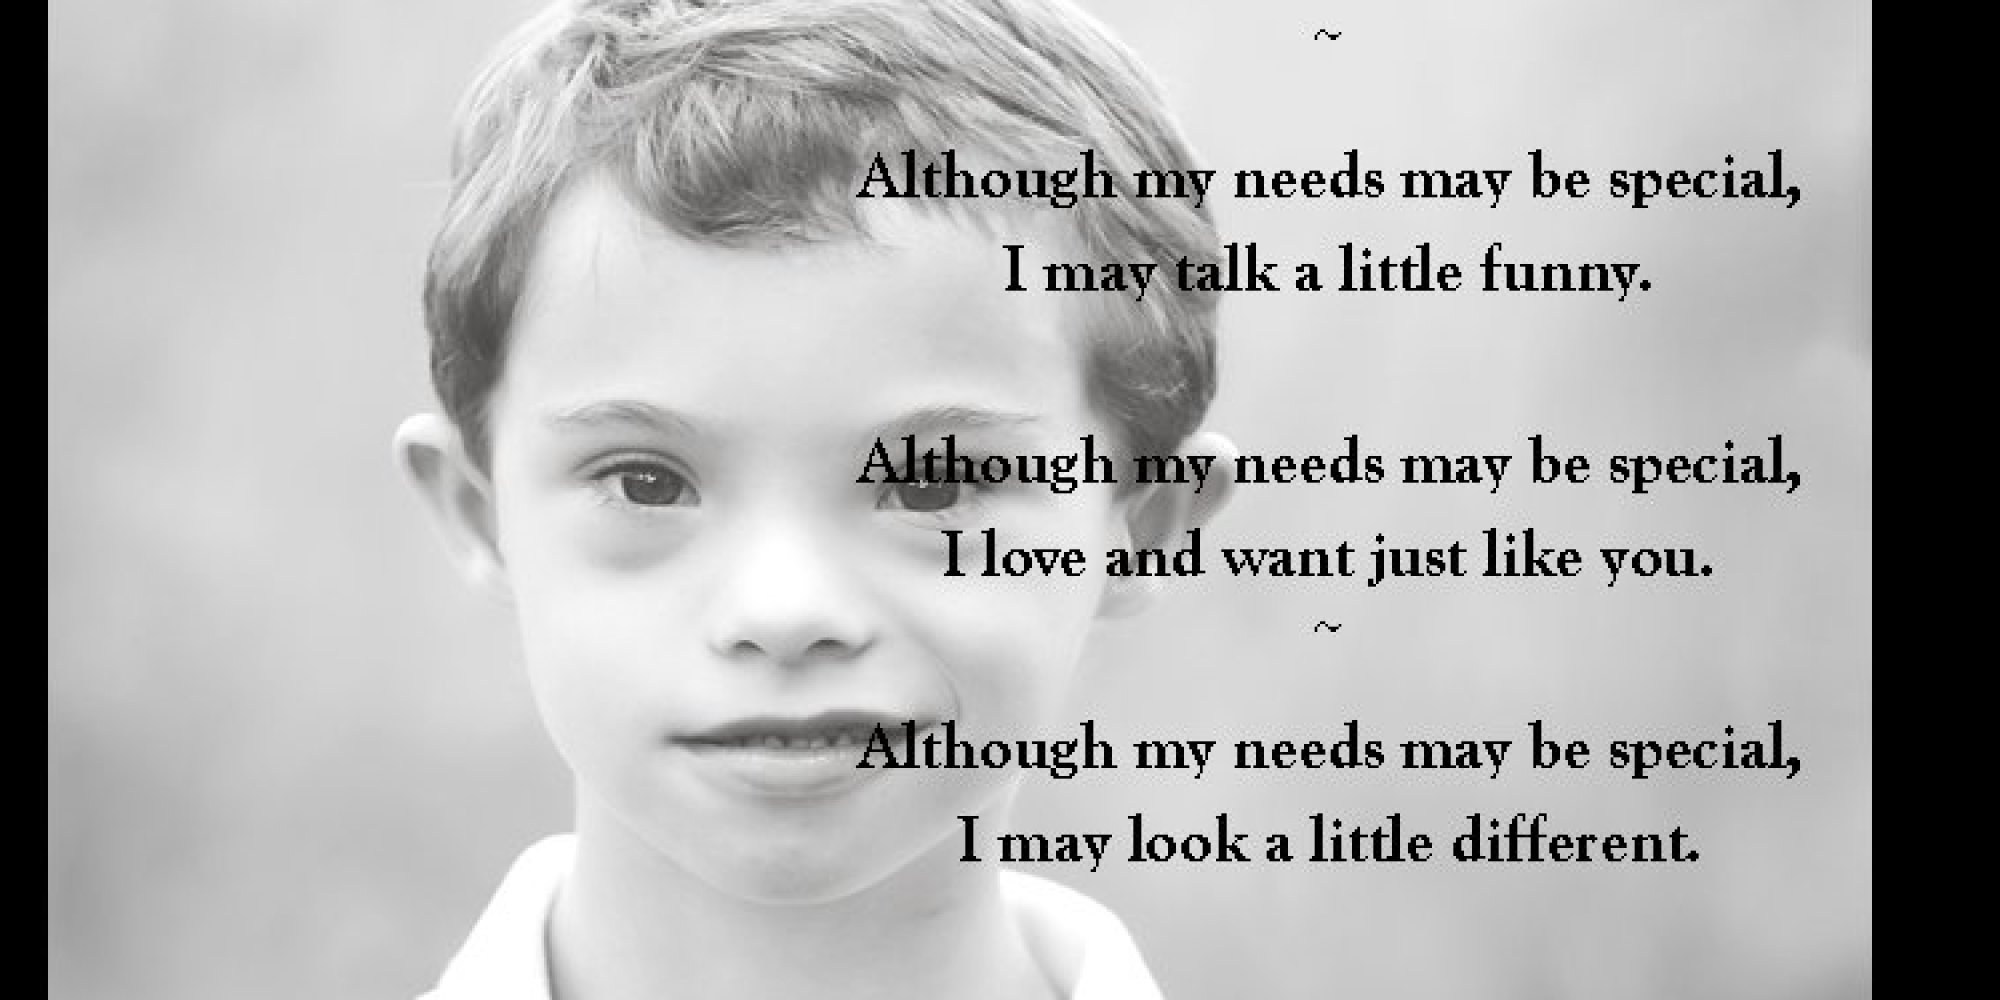 Special:' A Poem Written By a Mom For Her Special Needs Son